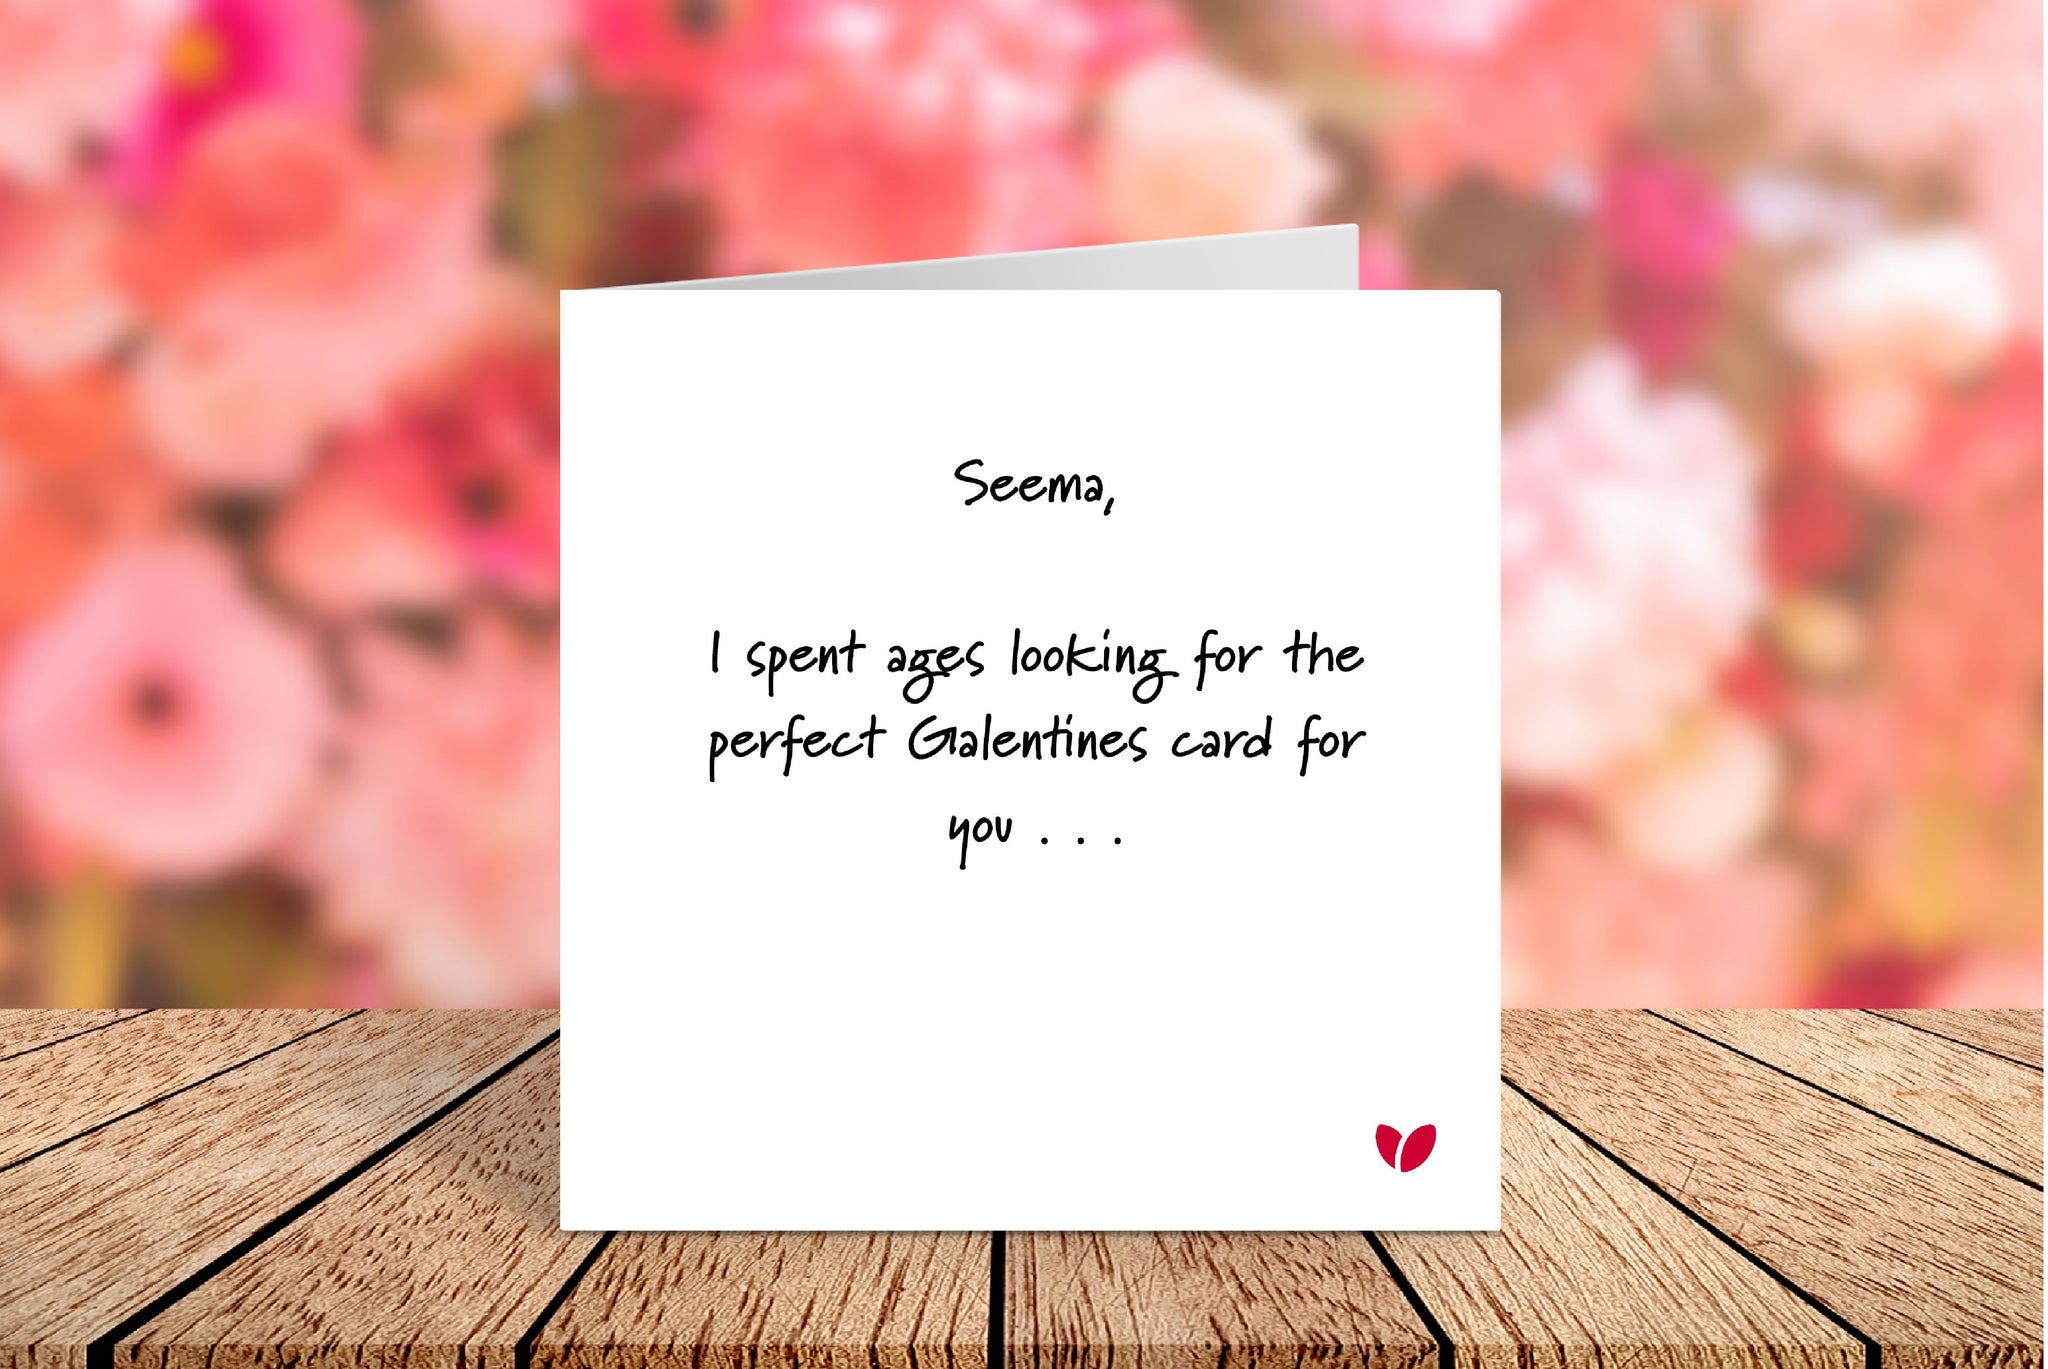 Perfect Galentines greeting card